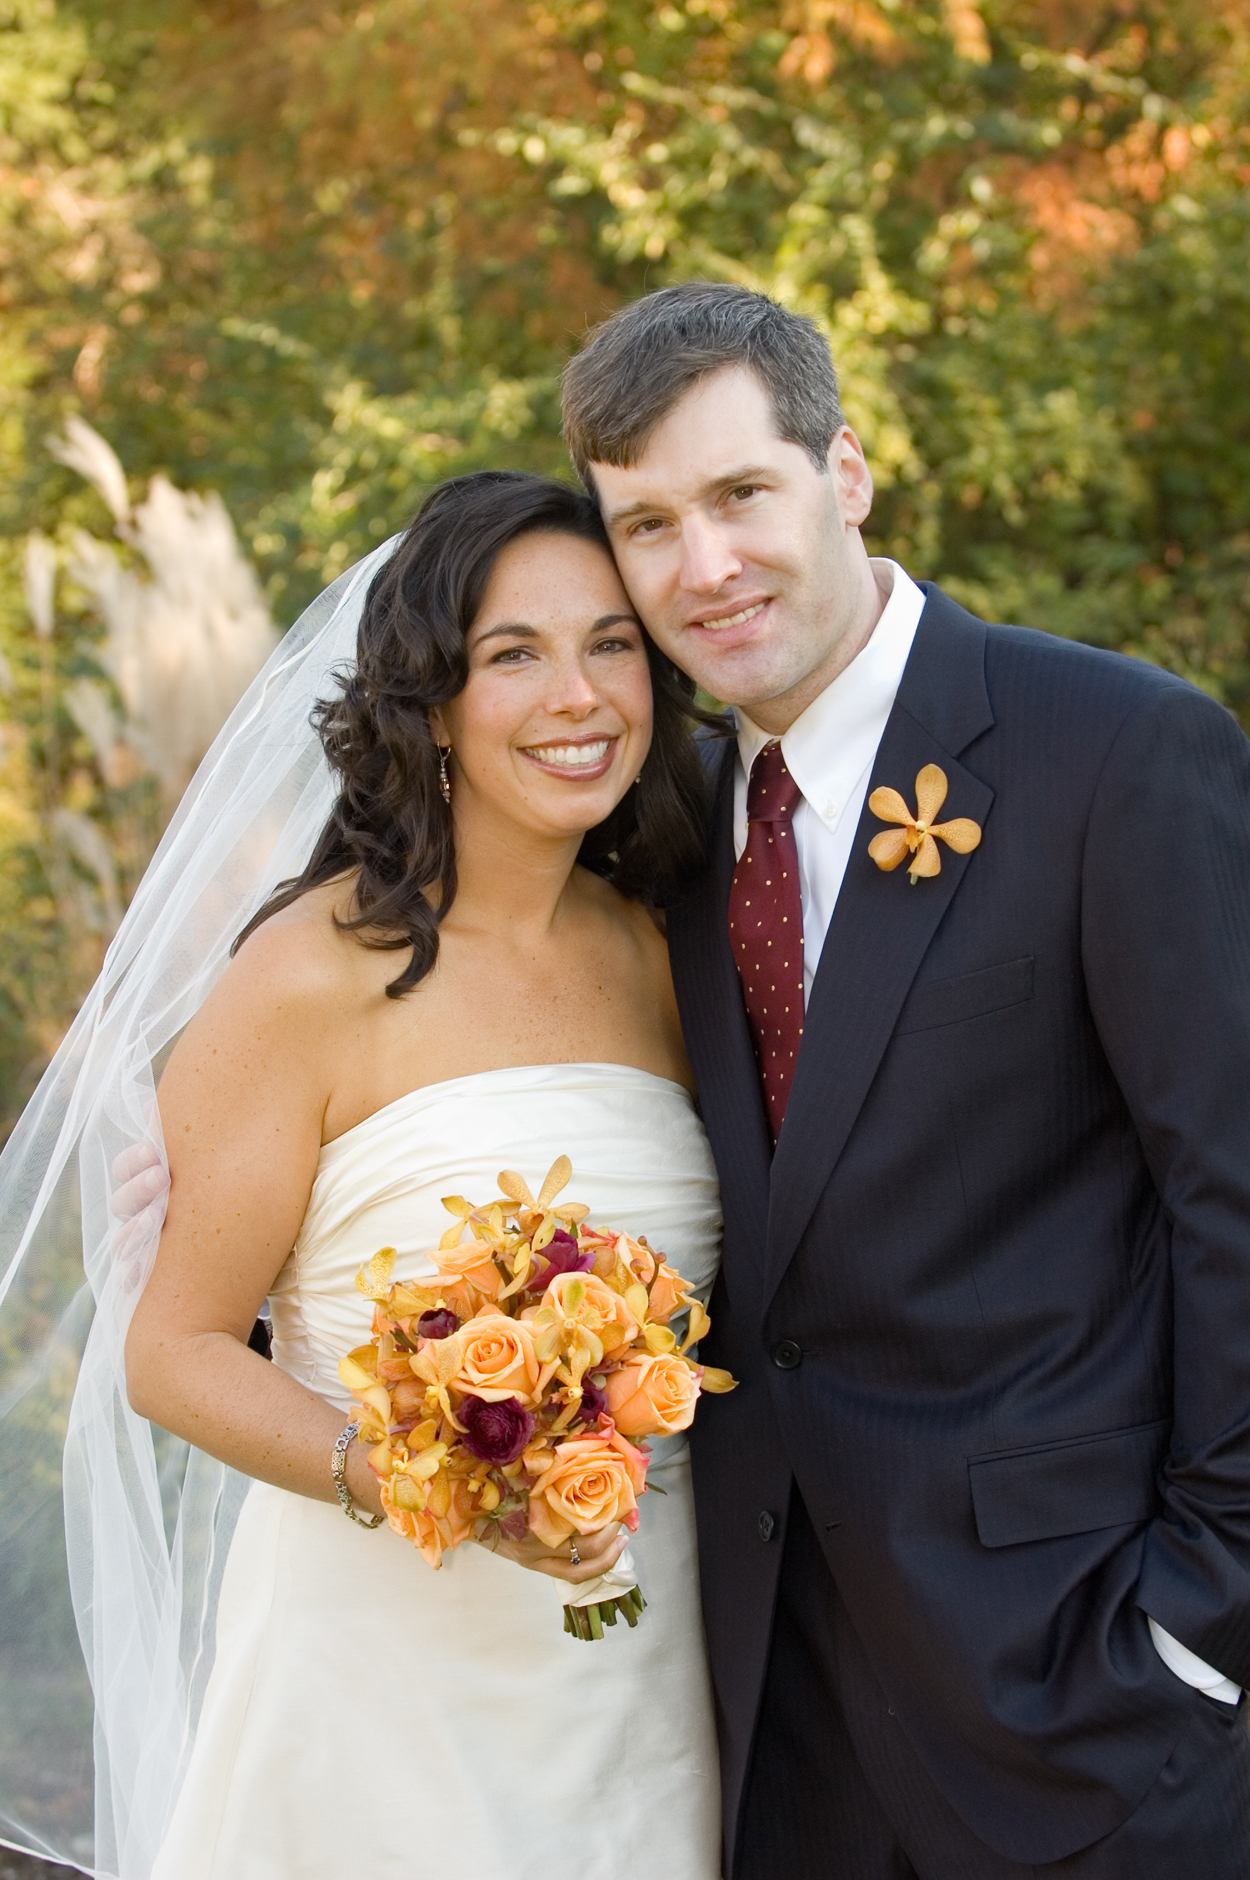 Sally worked with Kim and Ben to create a wedding they and their guests would never forget!